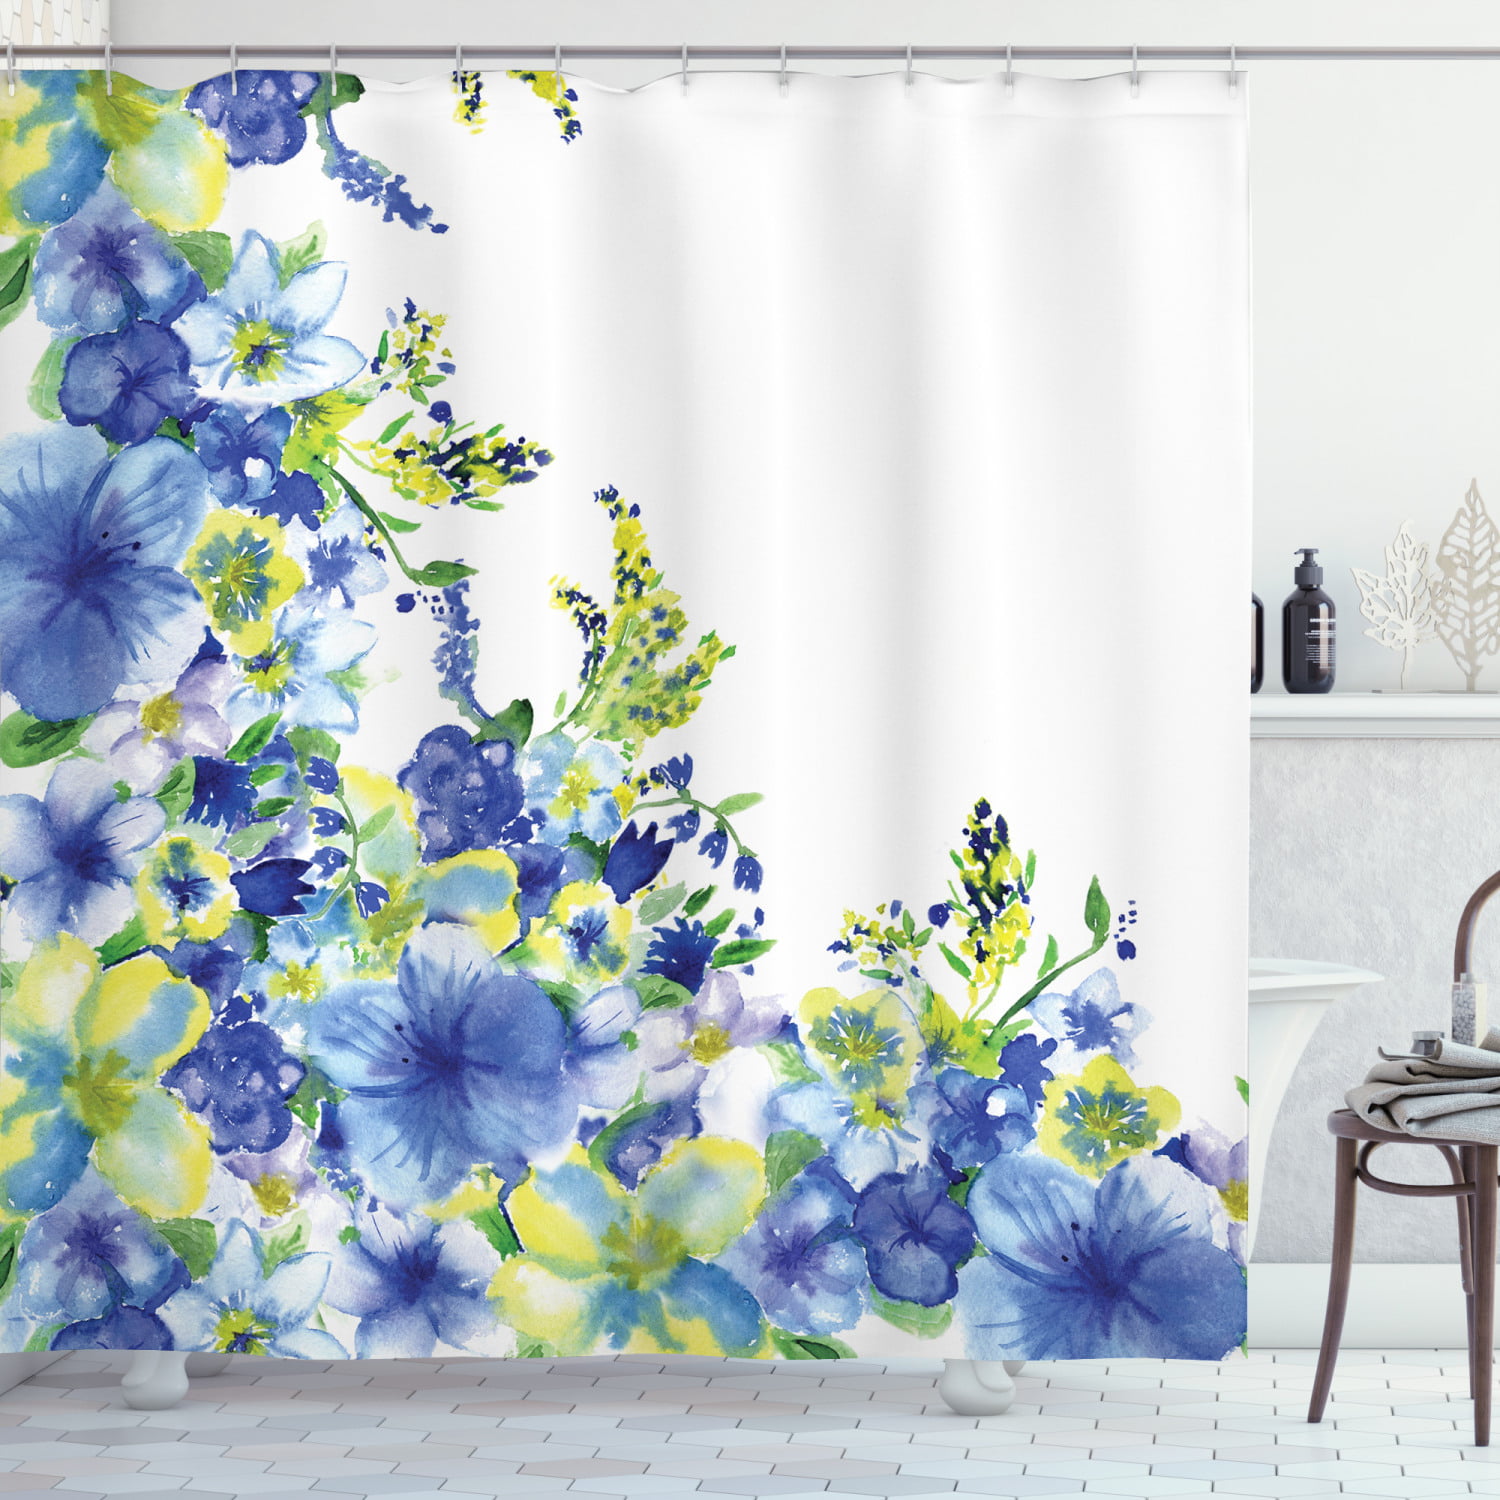 Light Blue Theme Decoration Shower Curtain Flowers Waterproof Polyester Fabric 